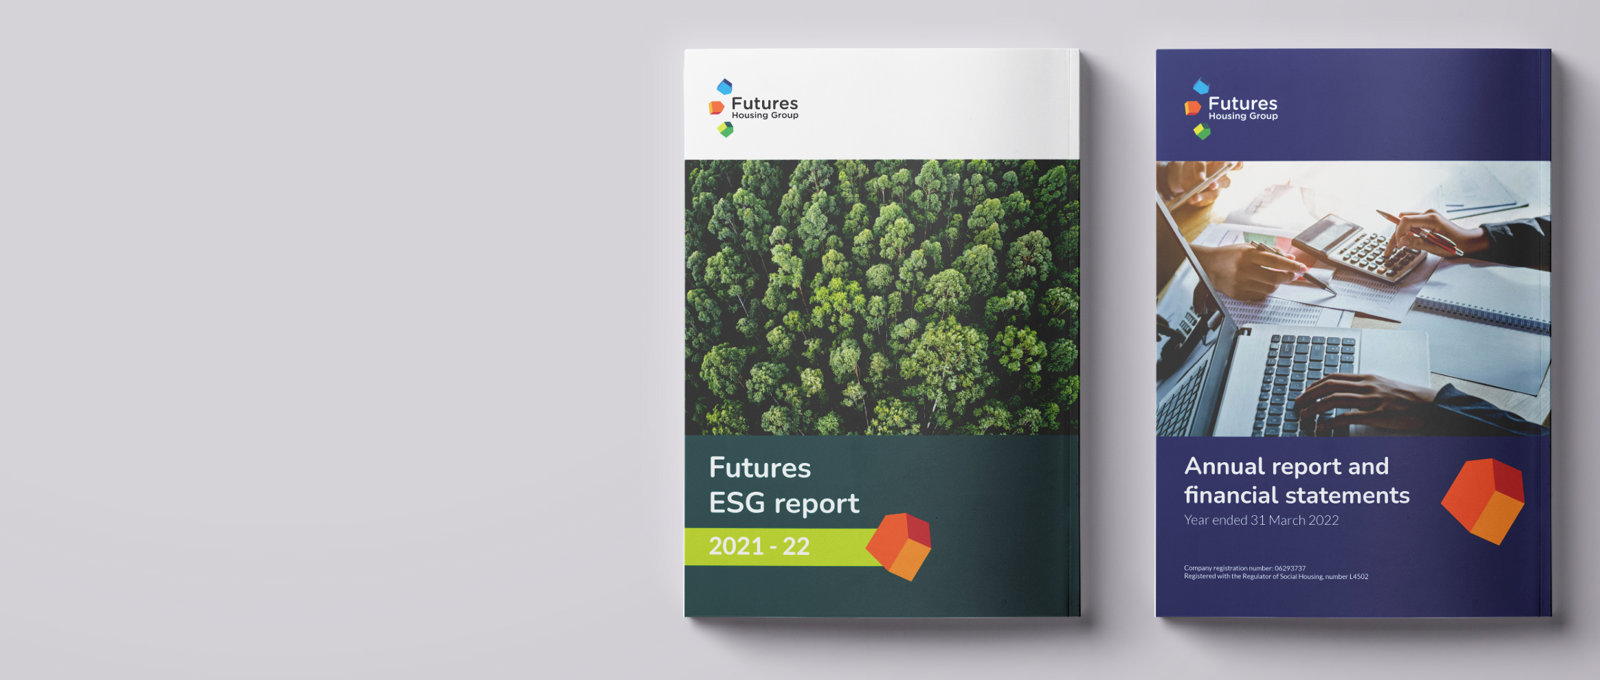 Website banner ESG report and financial statement